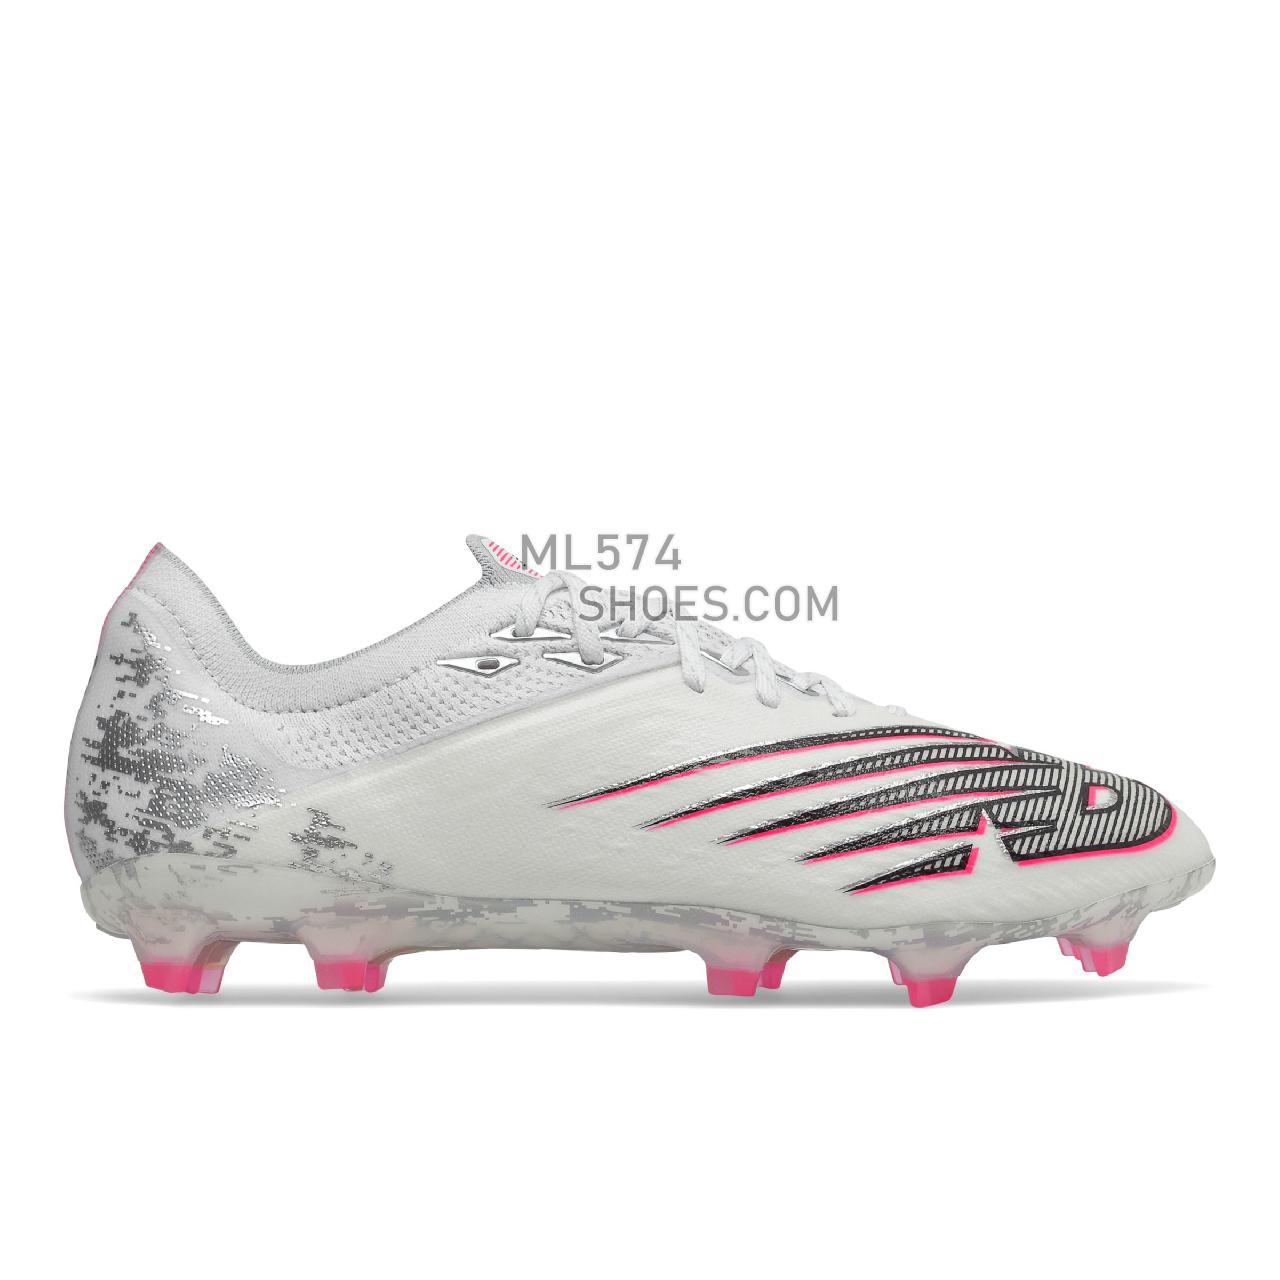 New Balance Furon V6+ Pro FG - Men's Soccer - White with Silver and Alpha Pink - MSF1FP65